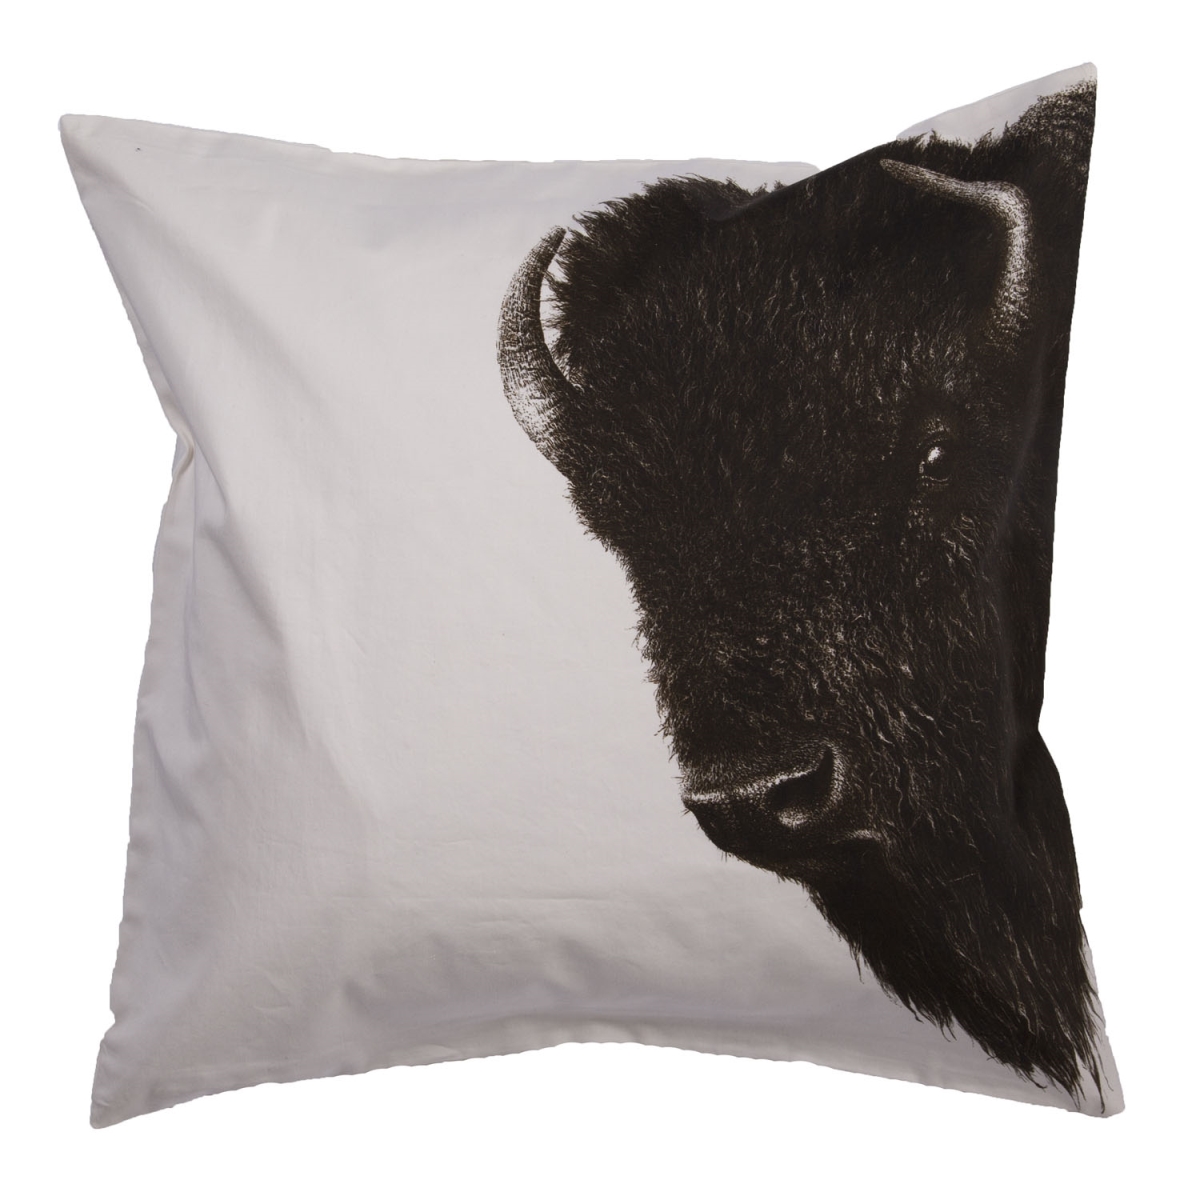 Plw102428 20 X 20 In. National Geographic Home Collection Buffalo White & Black Animal Down Throw Pillow